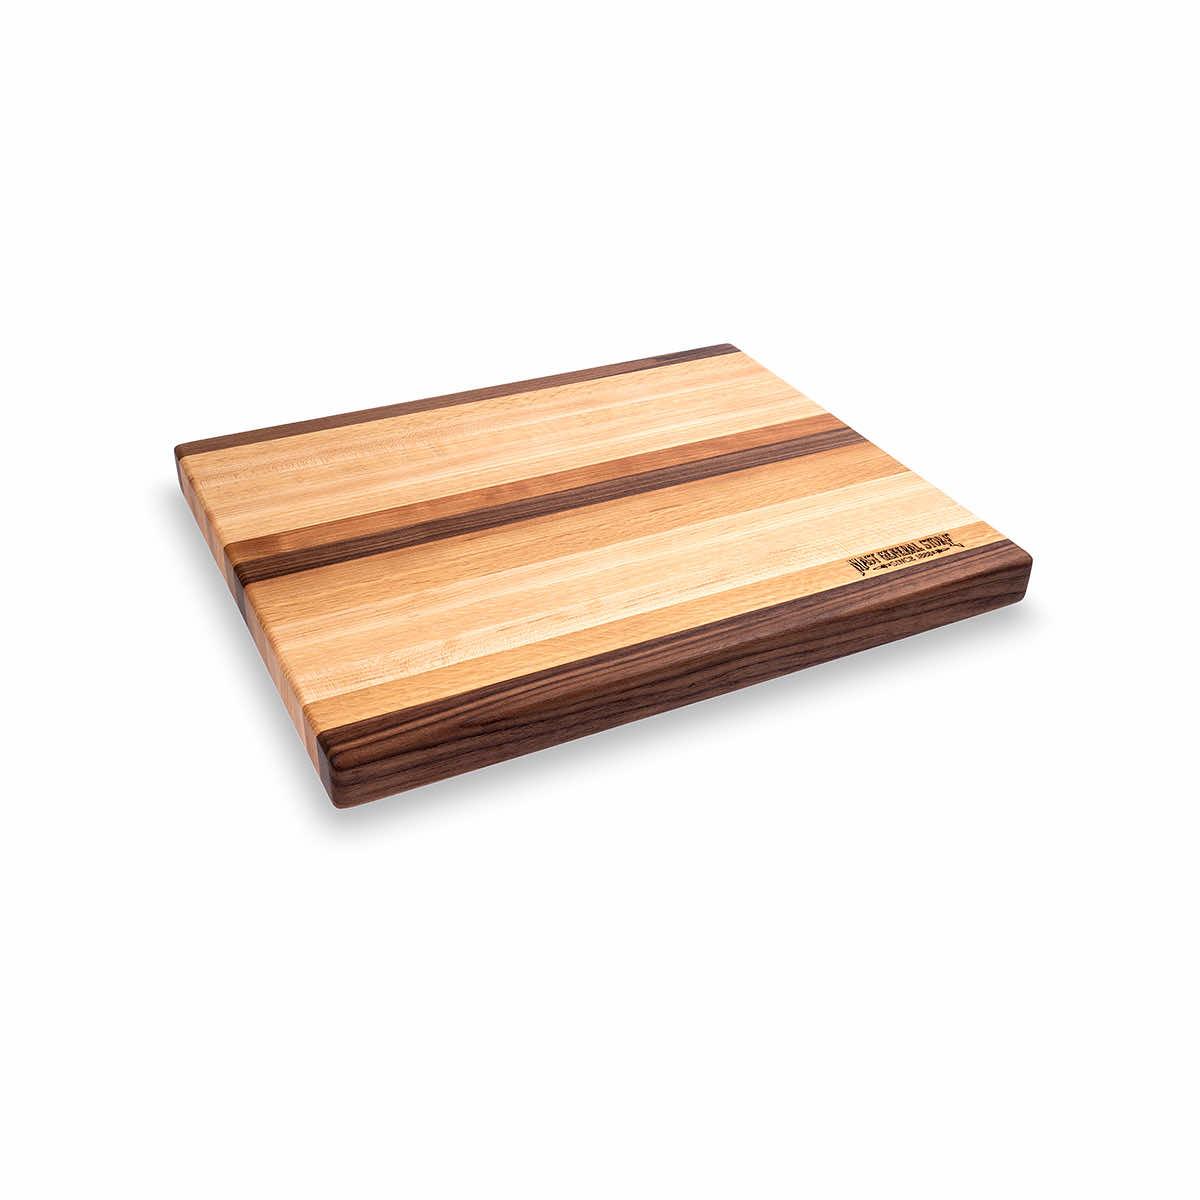 Mast General Store Wooden Cutting Board